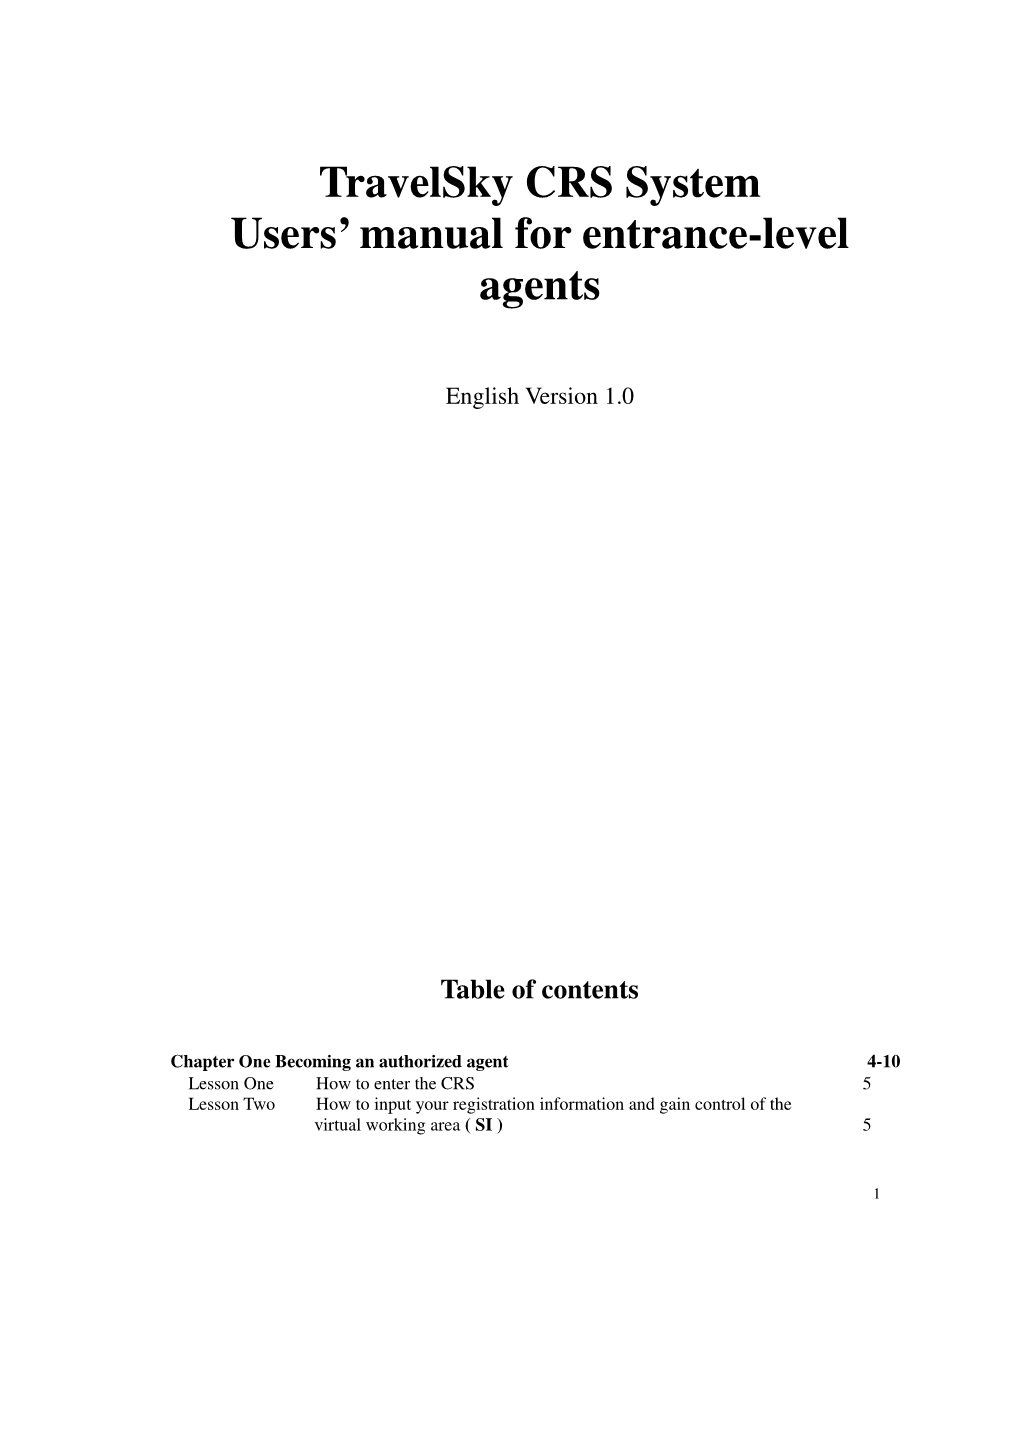 Travelsky CRS System Users' Manual for Entrance-Level Agents